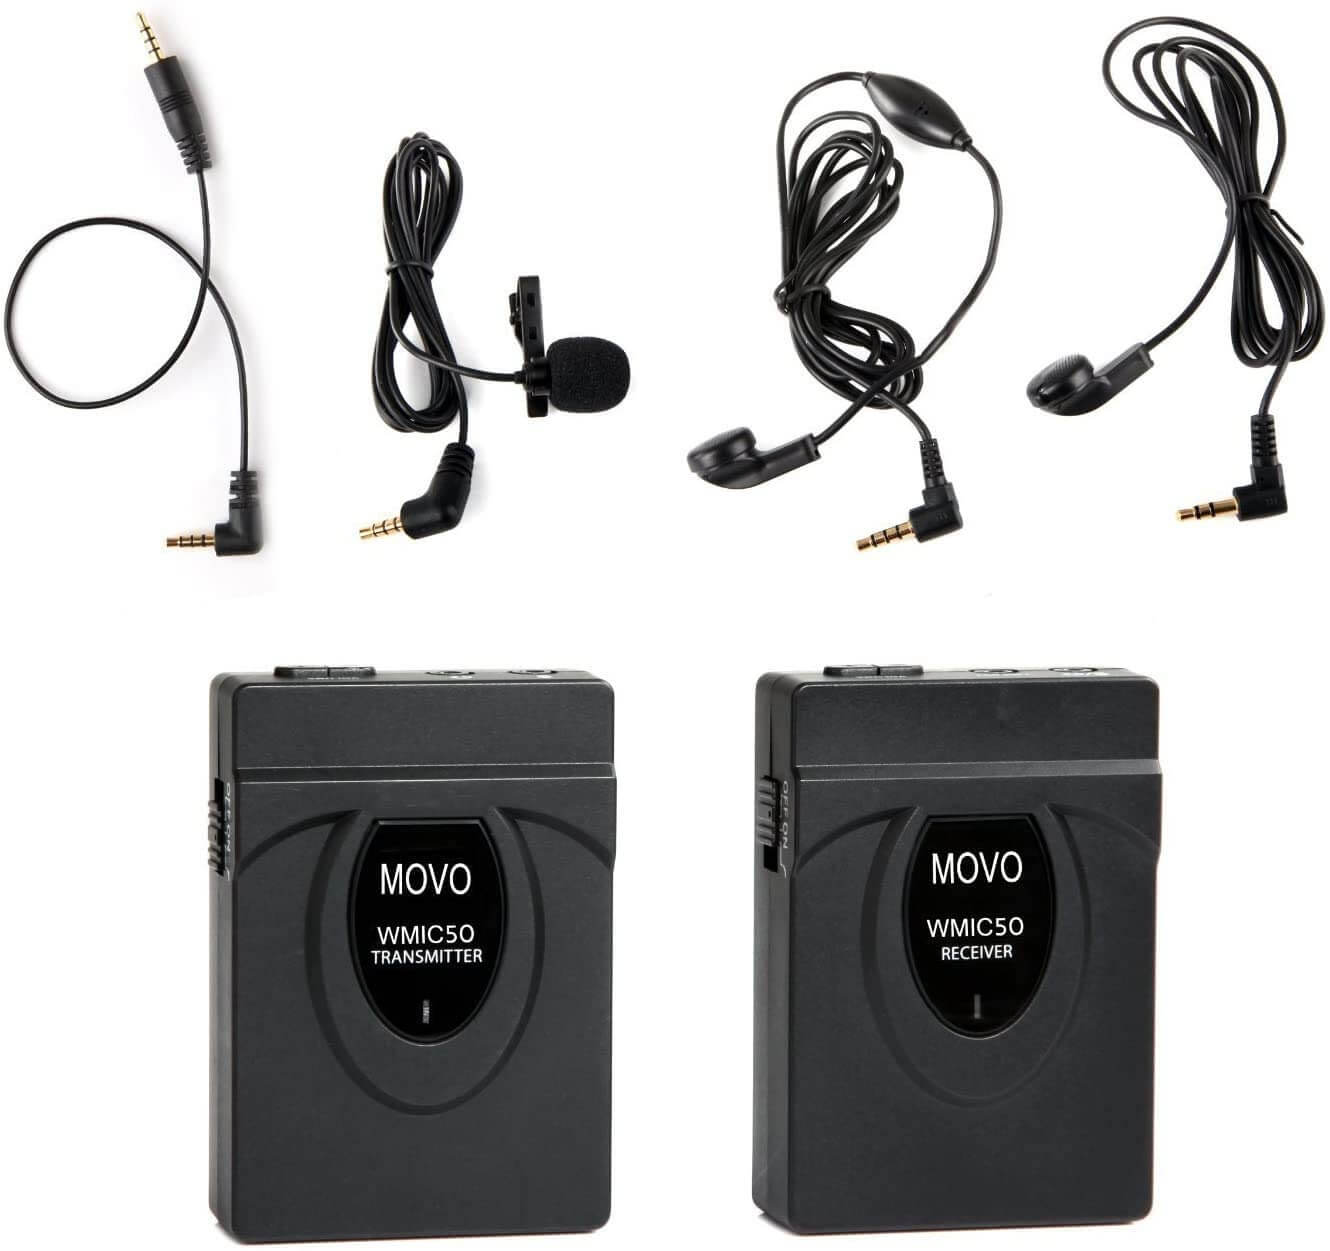 Transmitter and receiver + lav + single earbuds x2